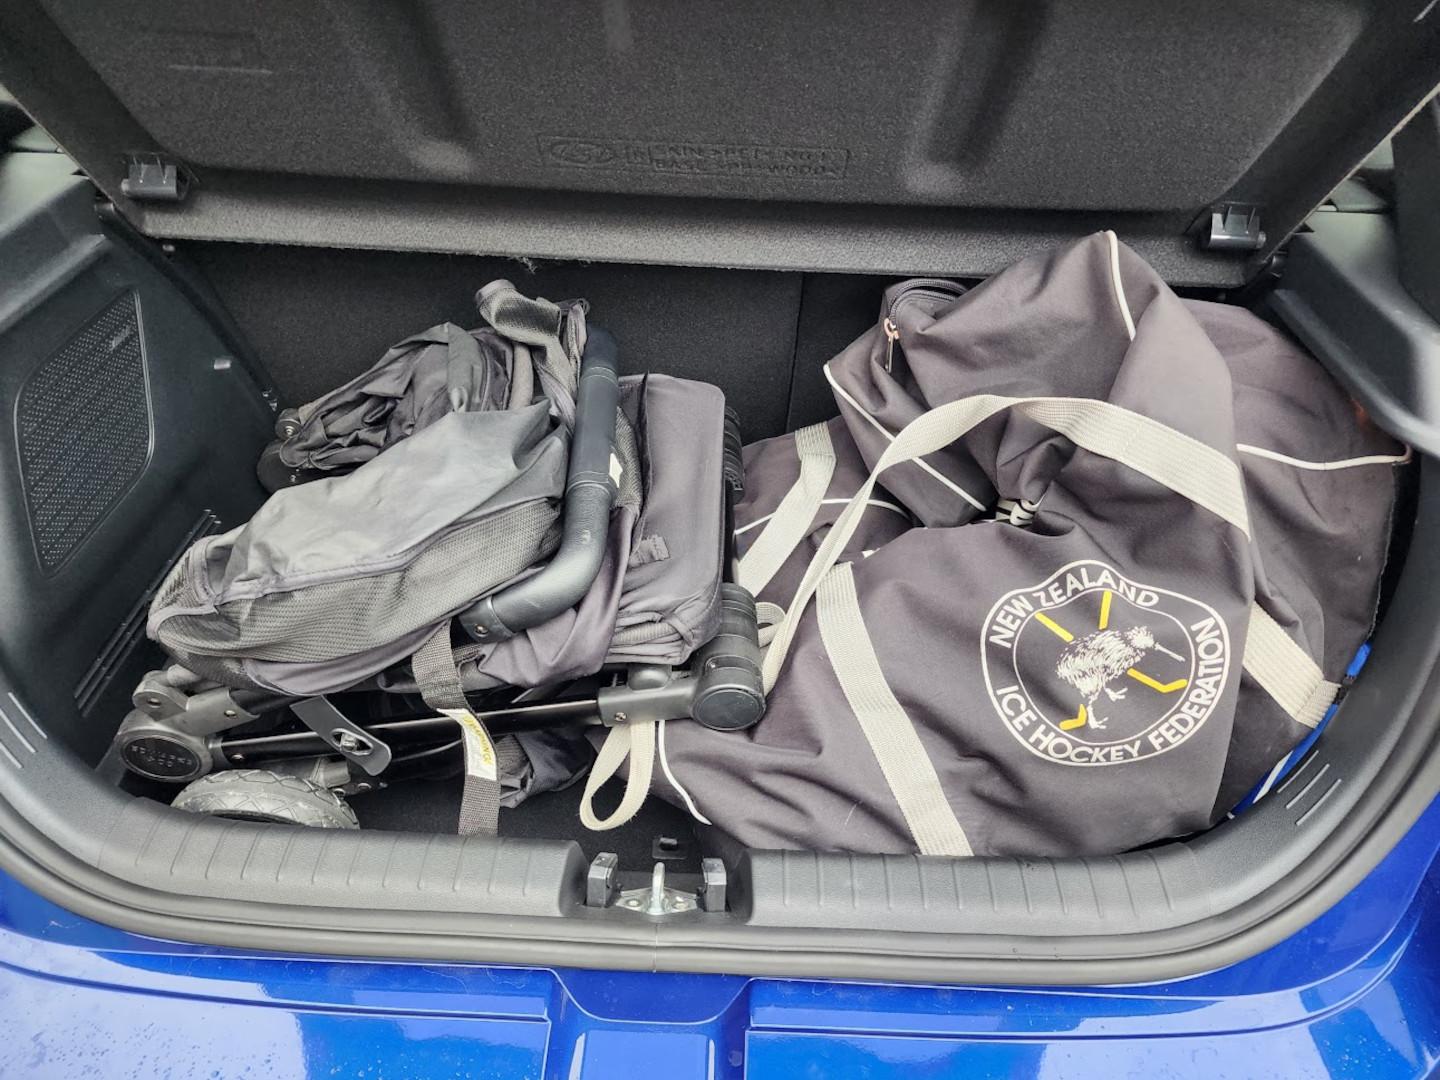 Hyundai i20 N boot filled with a pram and an ice hockey bag.